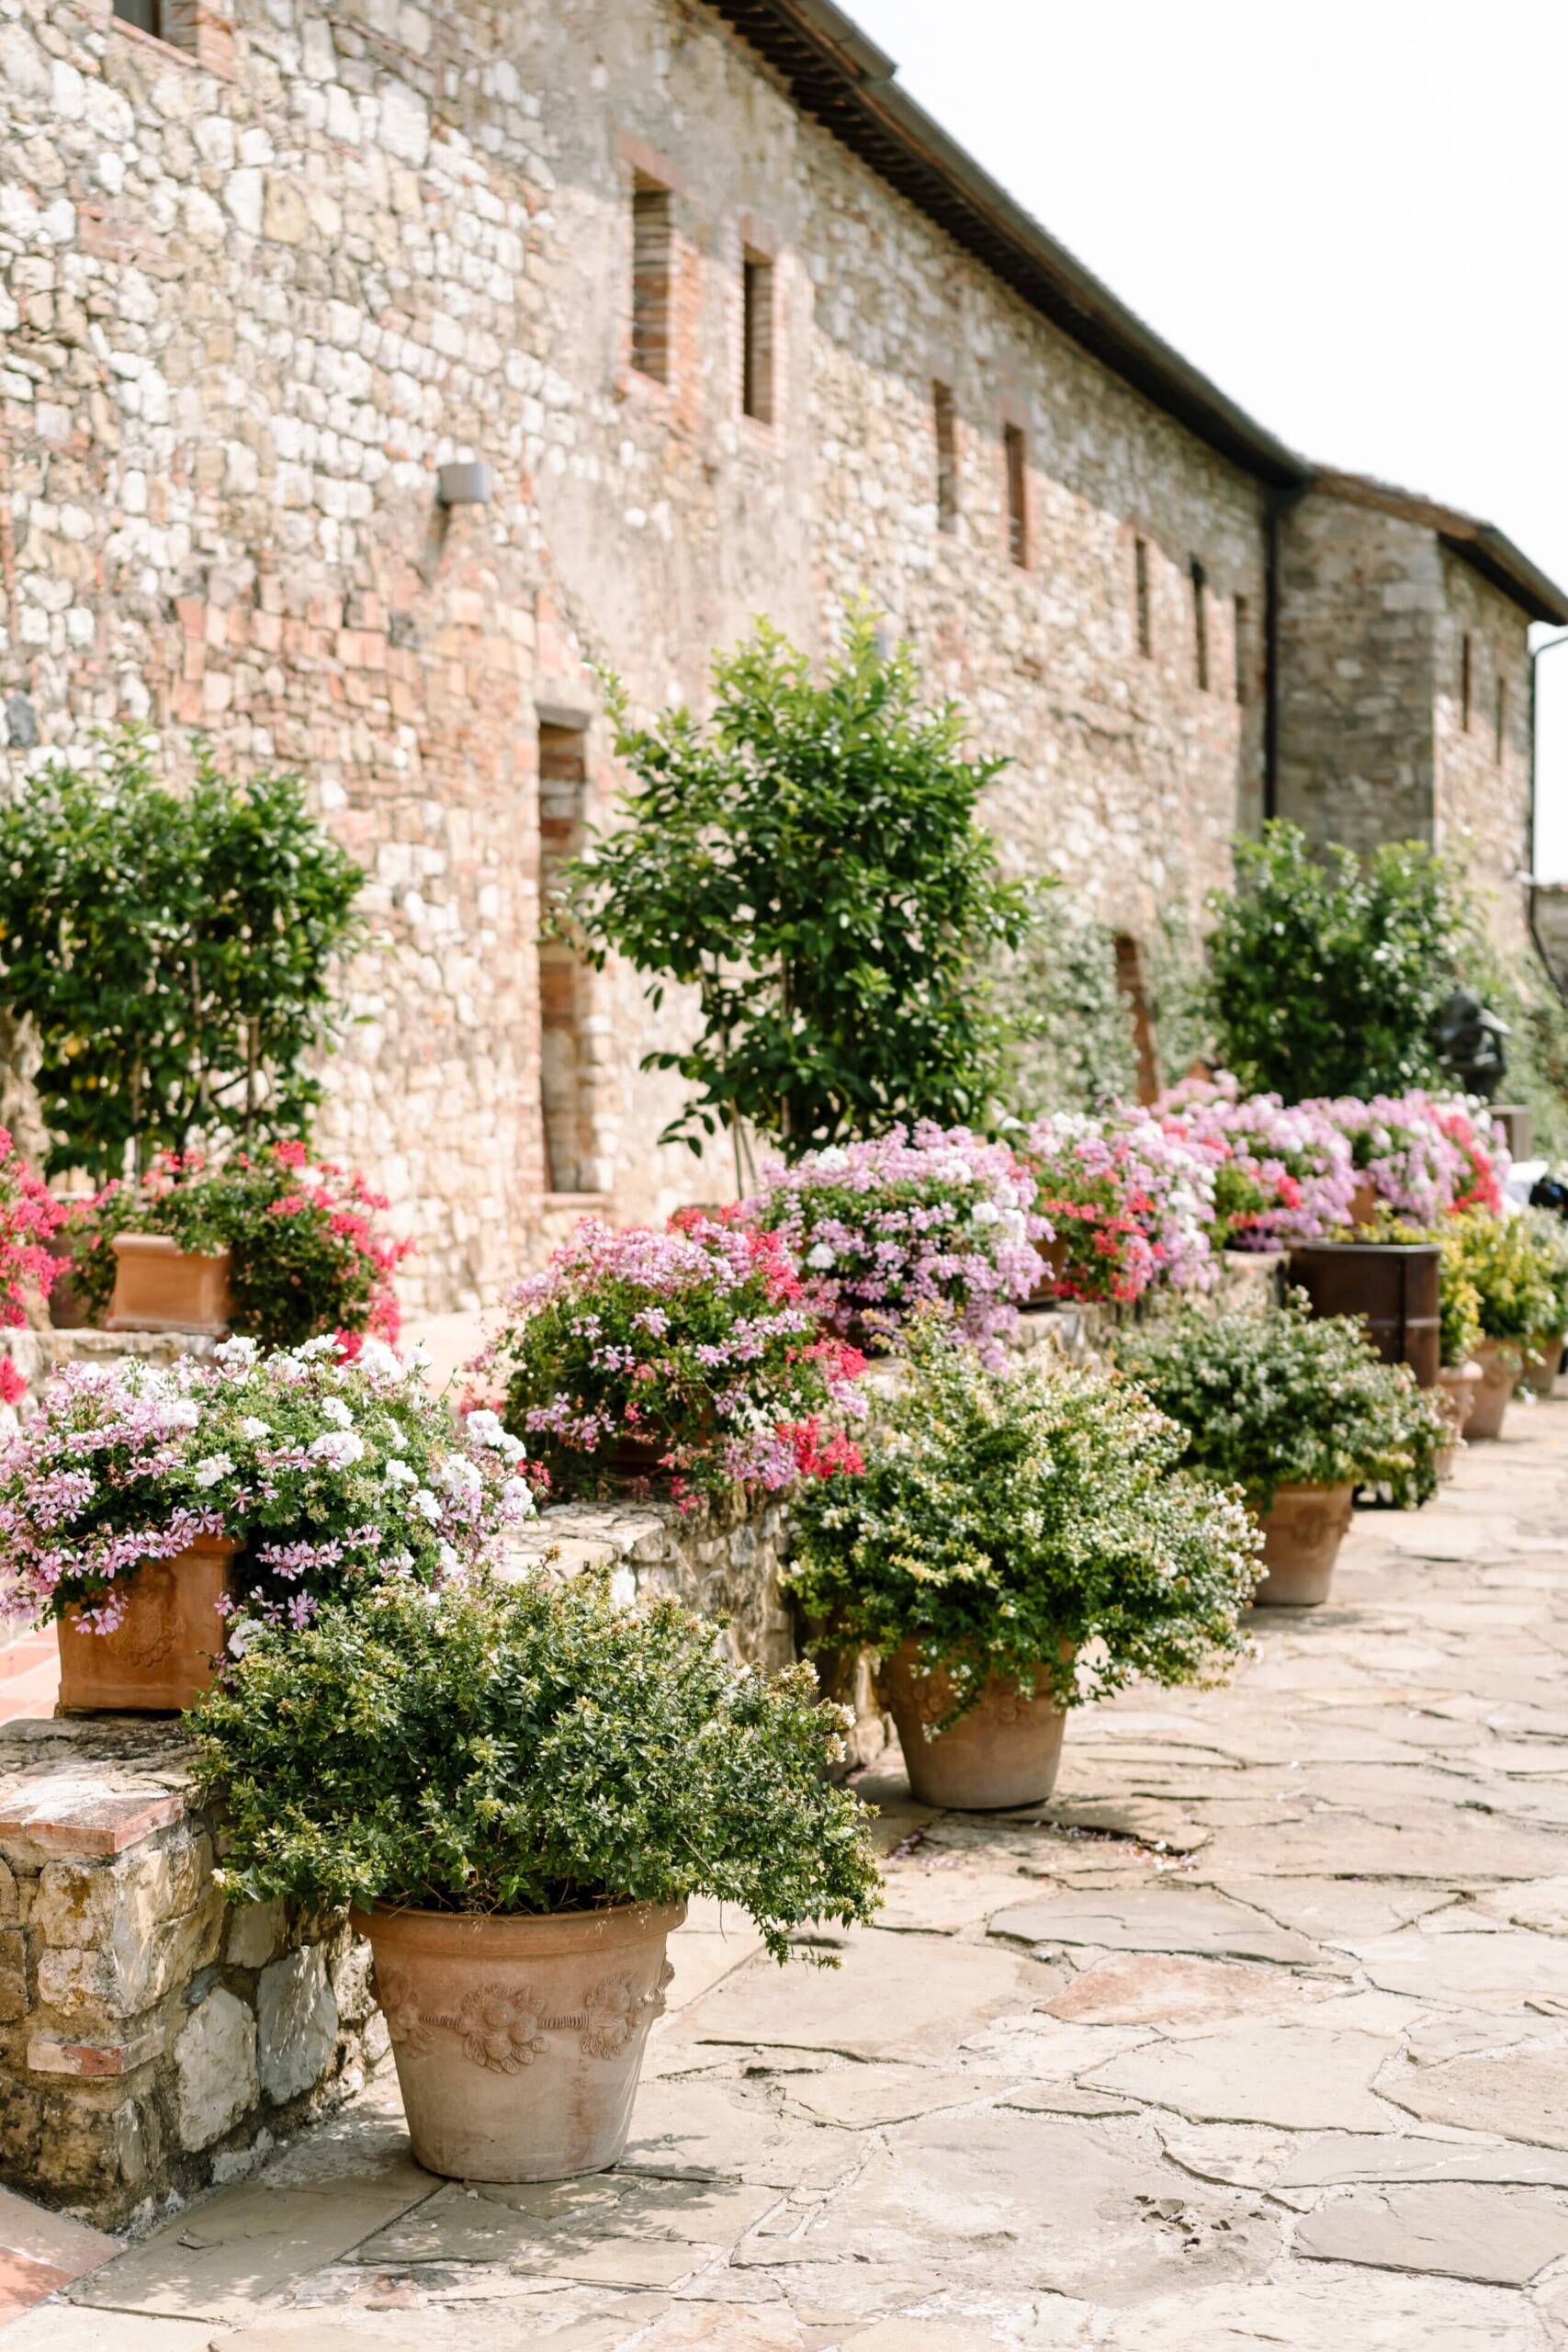 Colored geranium flowers in the garden of this exclusive resort in Tuscany